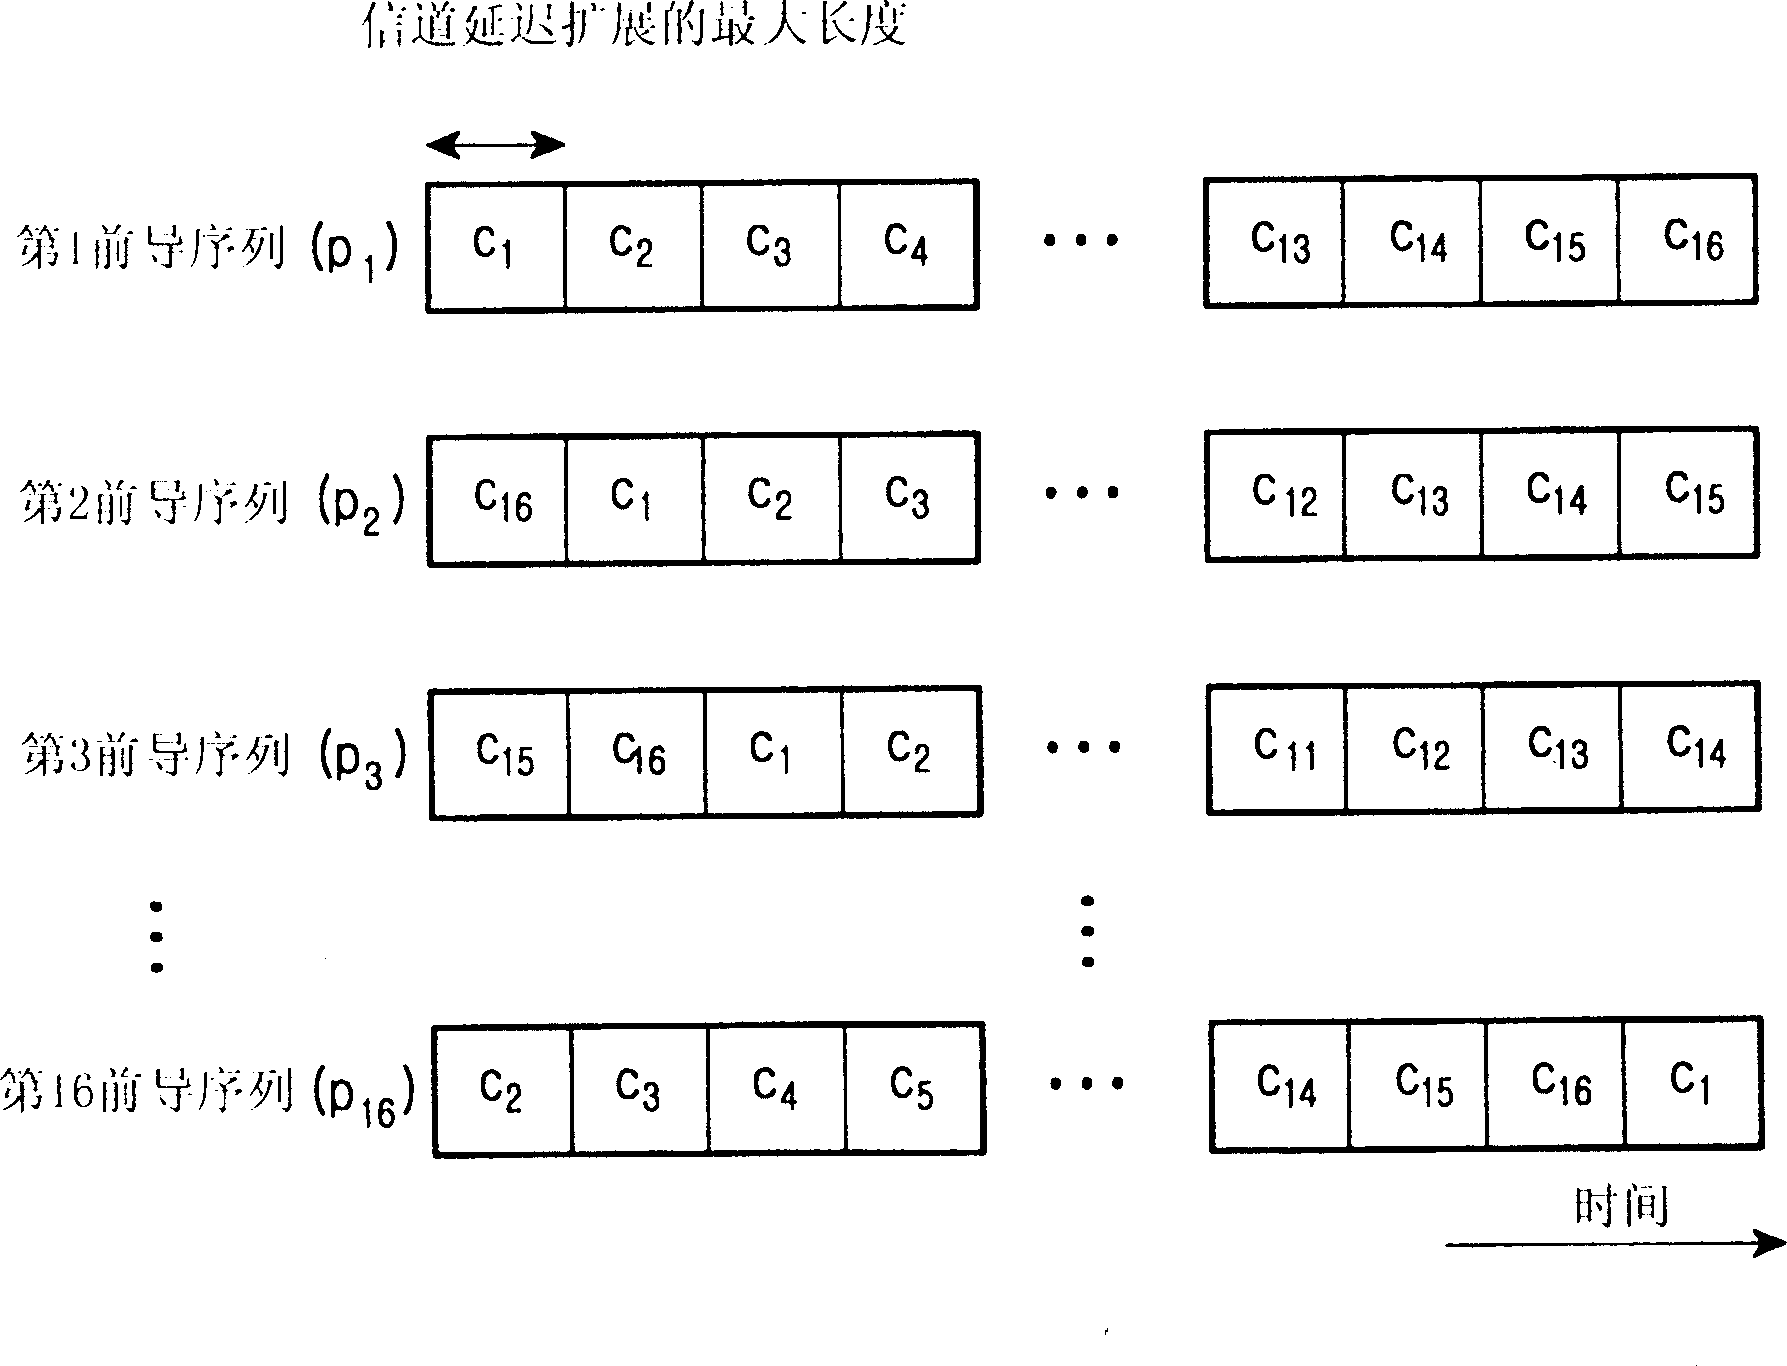 Method of transmitting and receiving preamble sequences in an orthogonal frequency division multiplexing communication system